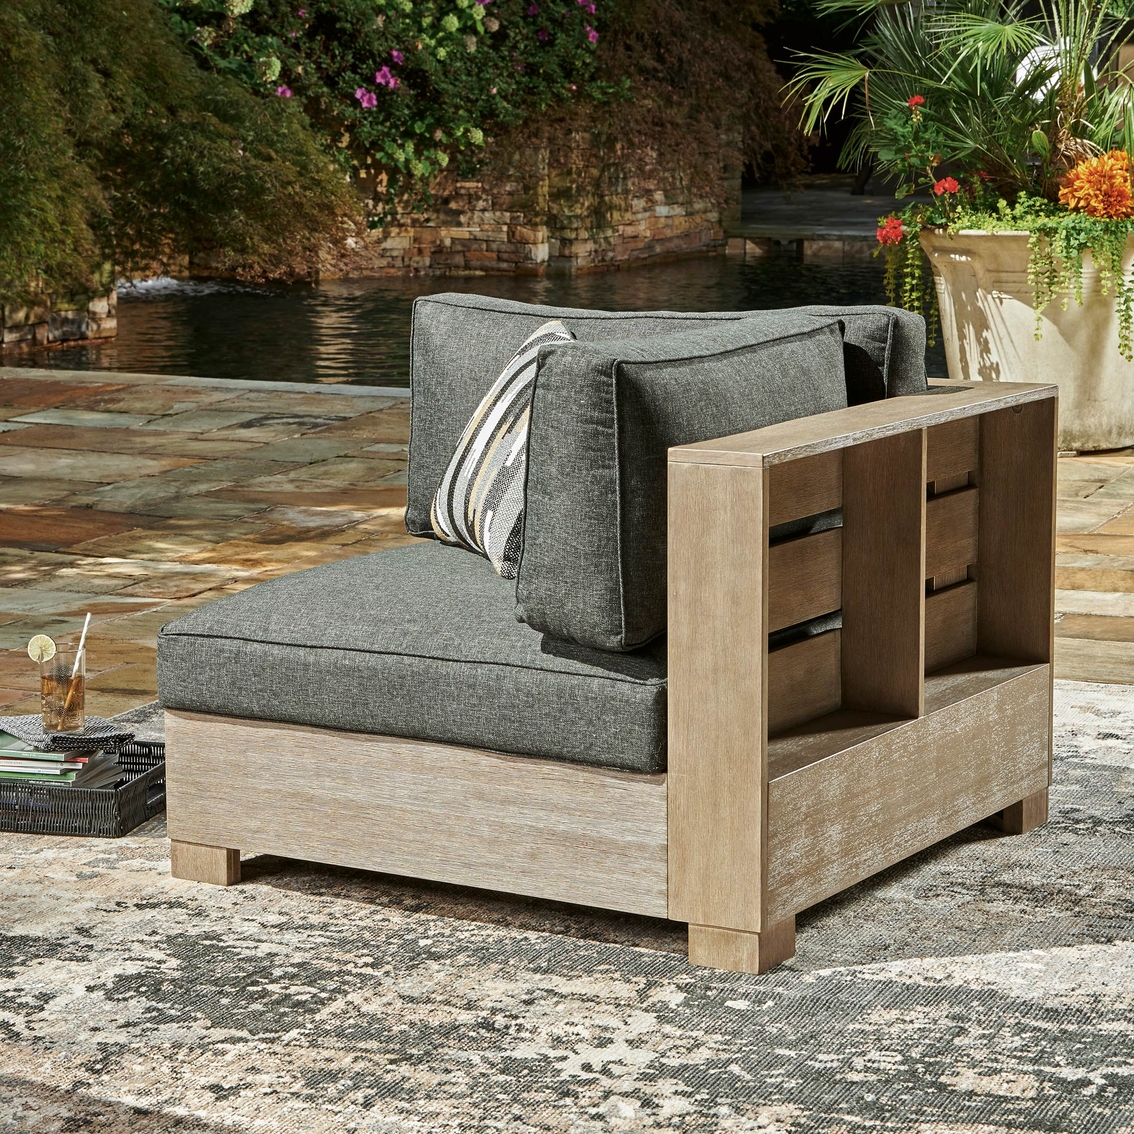 Signature Design by Ashley Citrine Park 2 pc. Outdoor Loveseat - Image 3 of 3